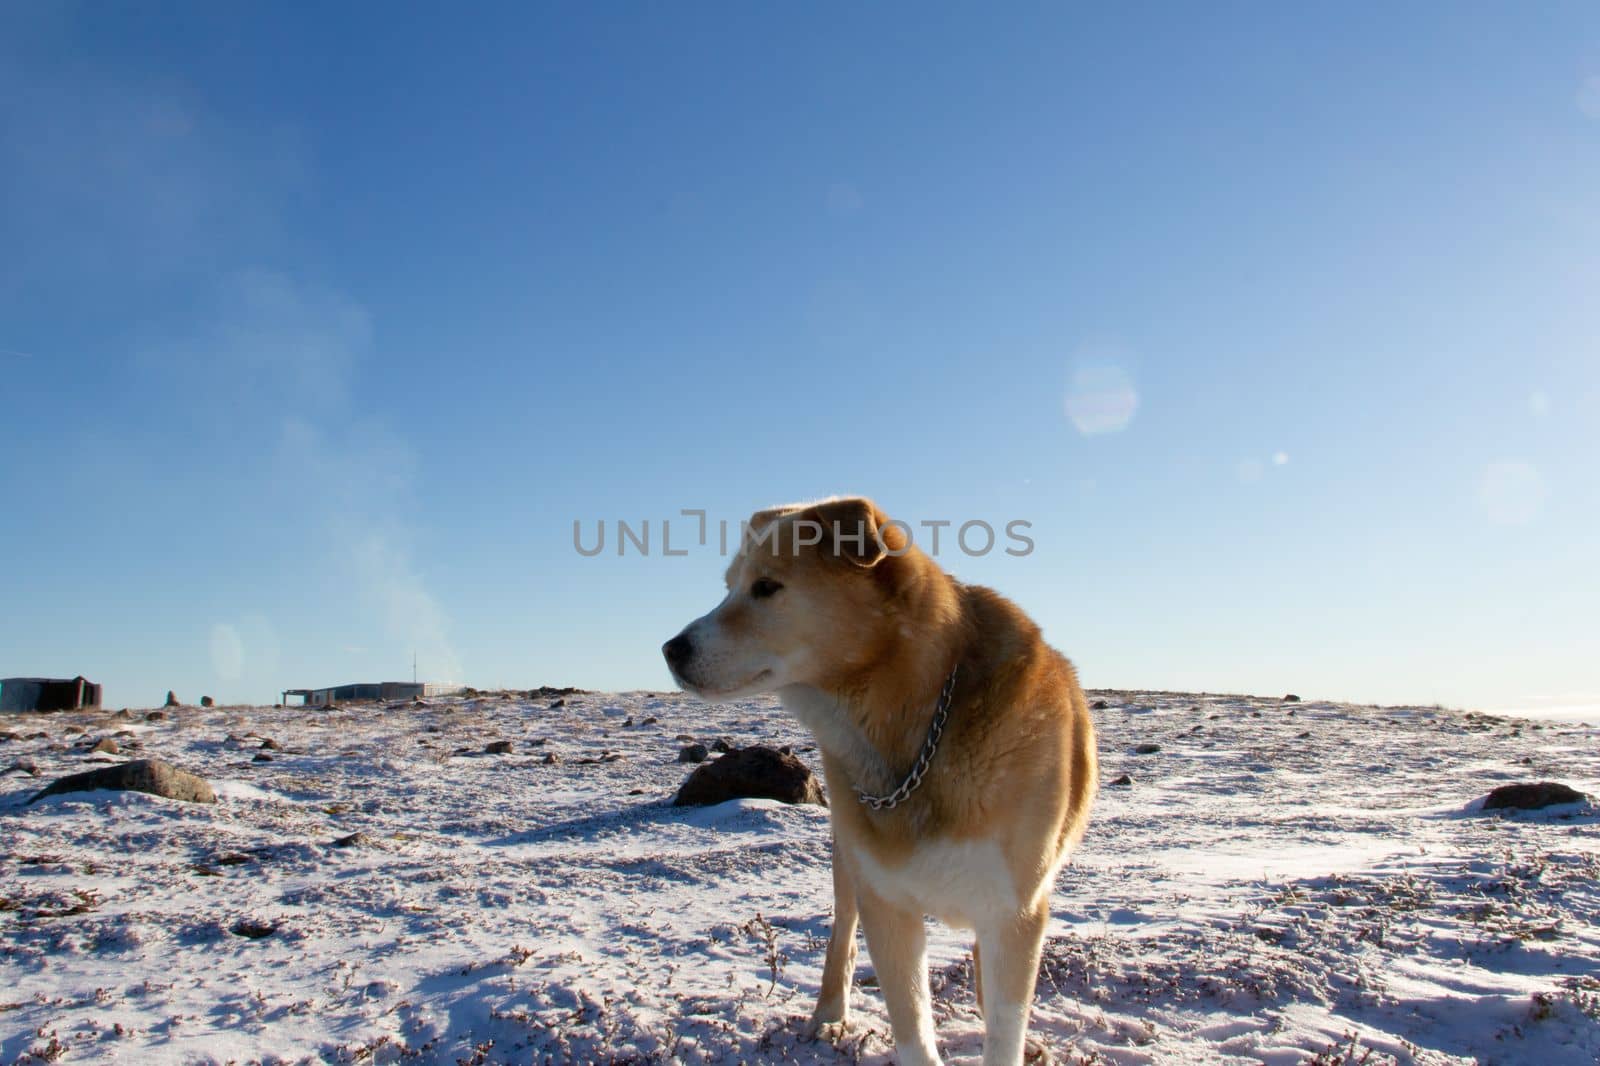 A yellow Labrador dog standing on snow in a cold arctic landscape, near Arviat, Nunavut Canada